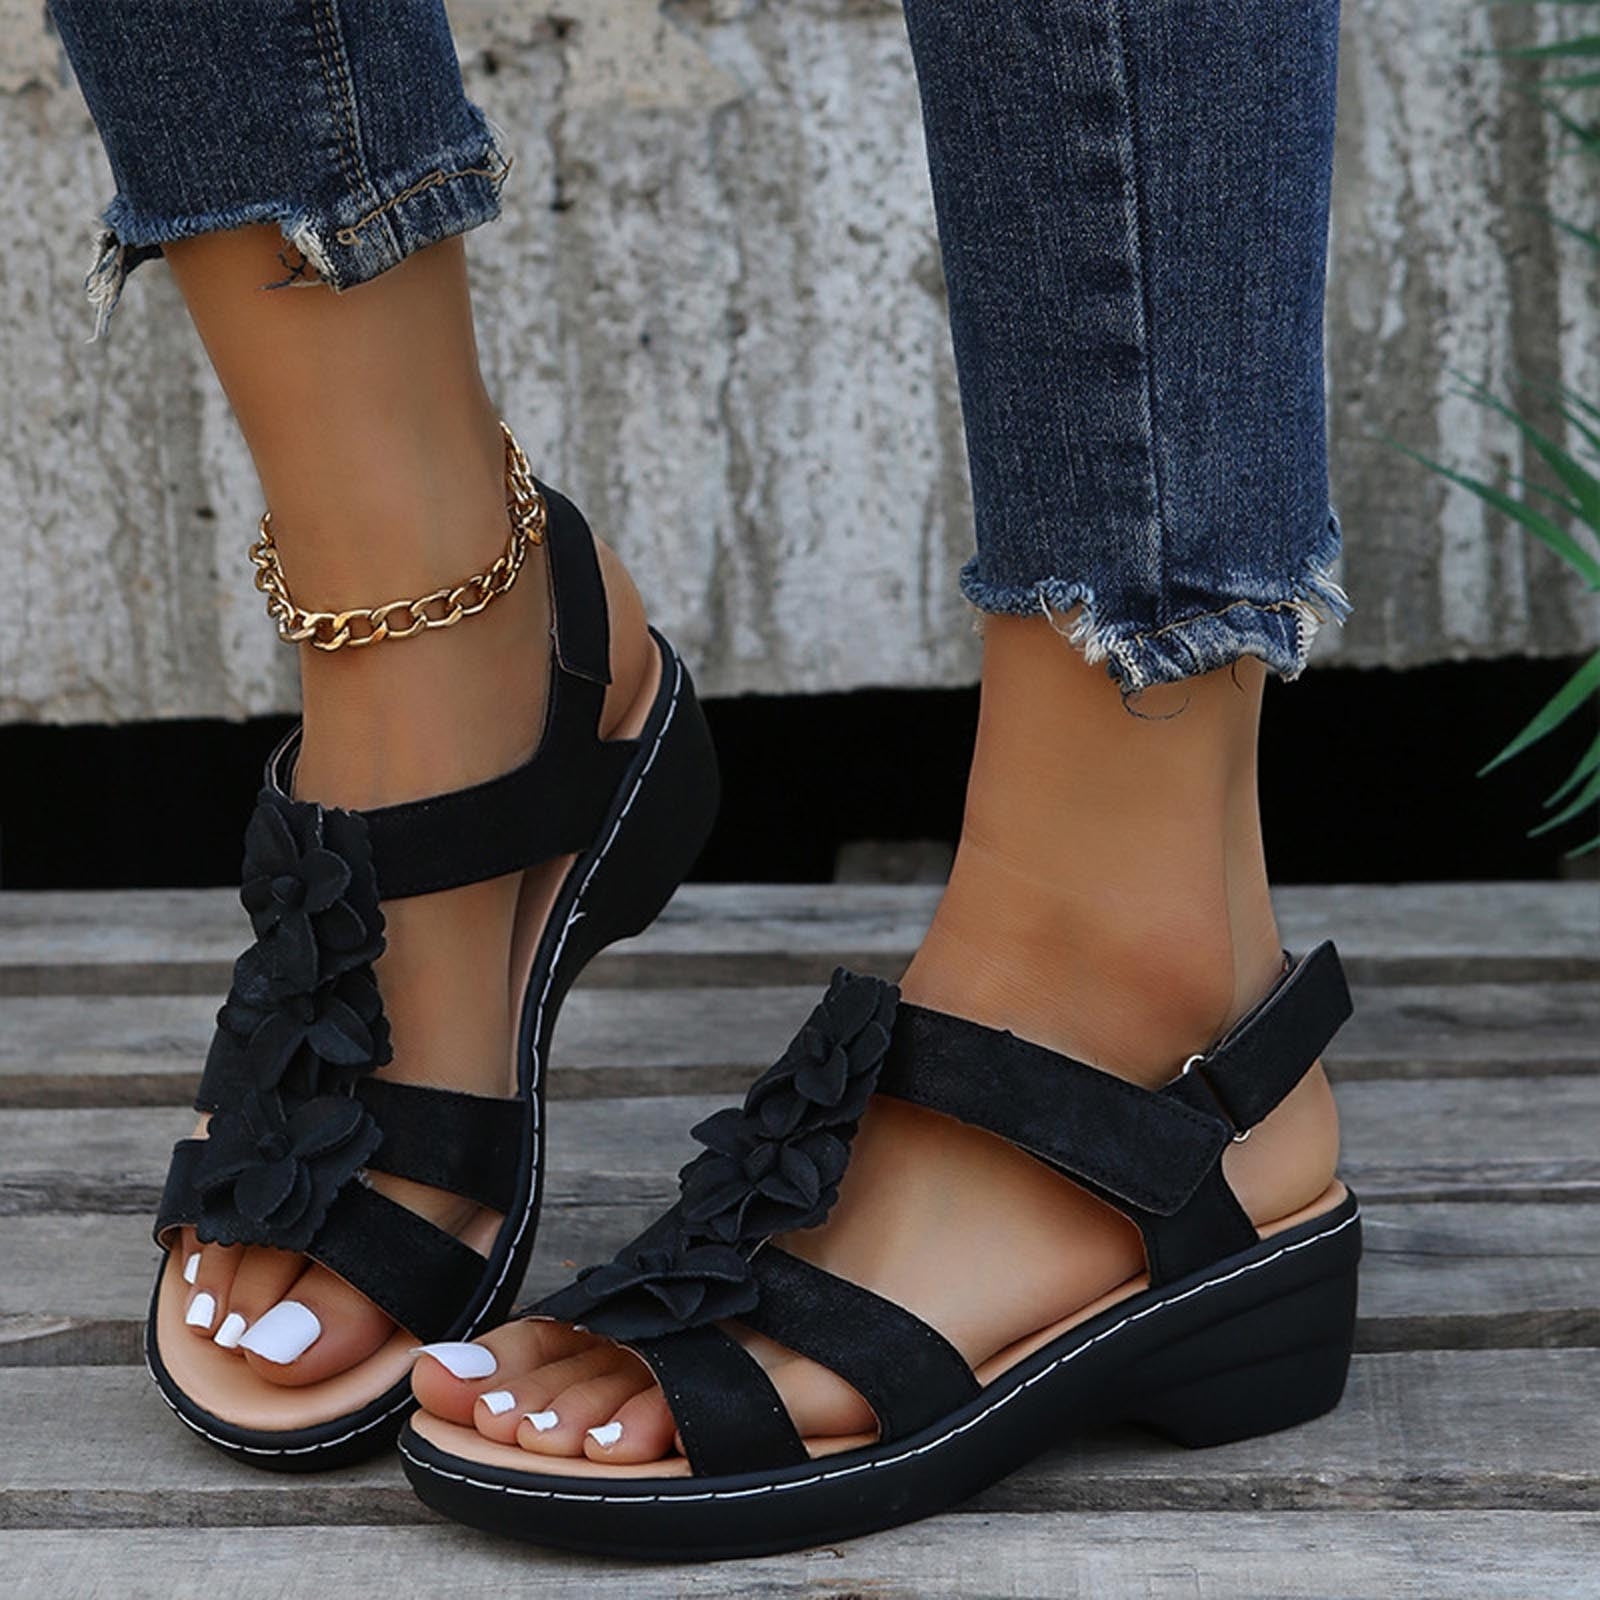 Women's Wedge Sandal Platform Toe Ring Sandals Cutout Breathable Slingback Buckle Ankle Beach Travel Shoes 